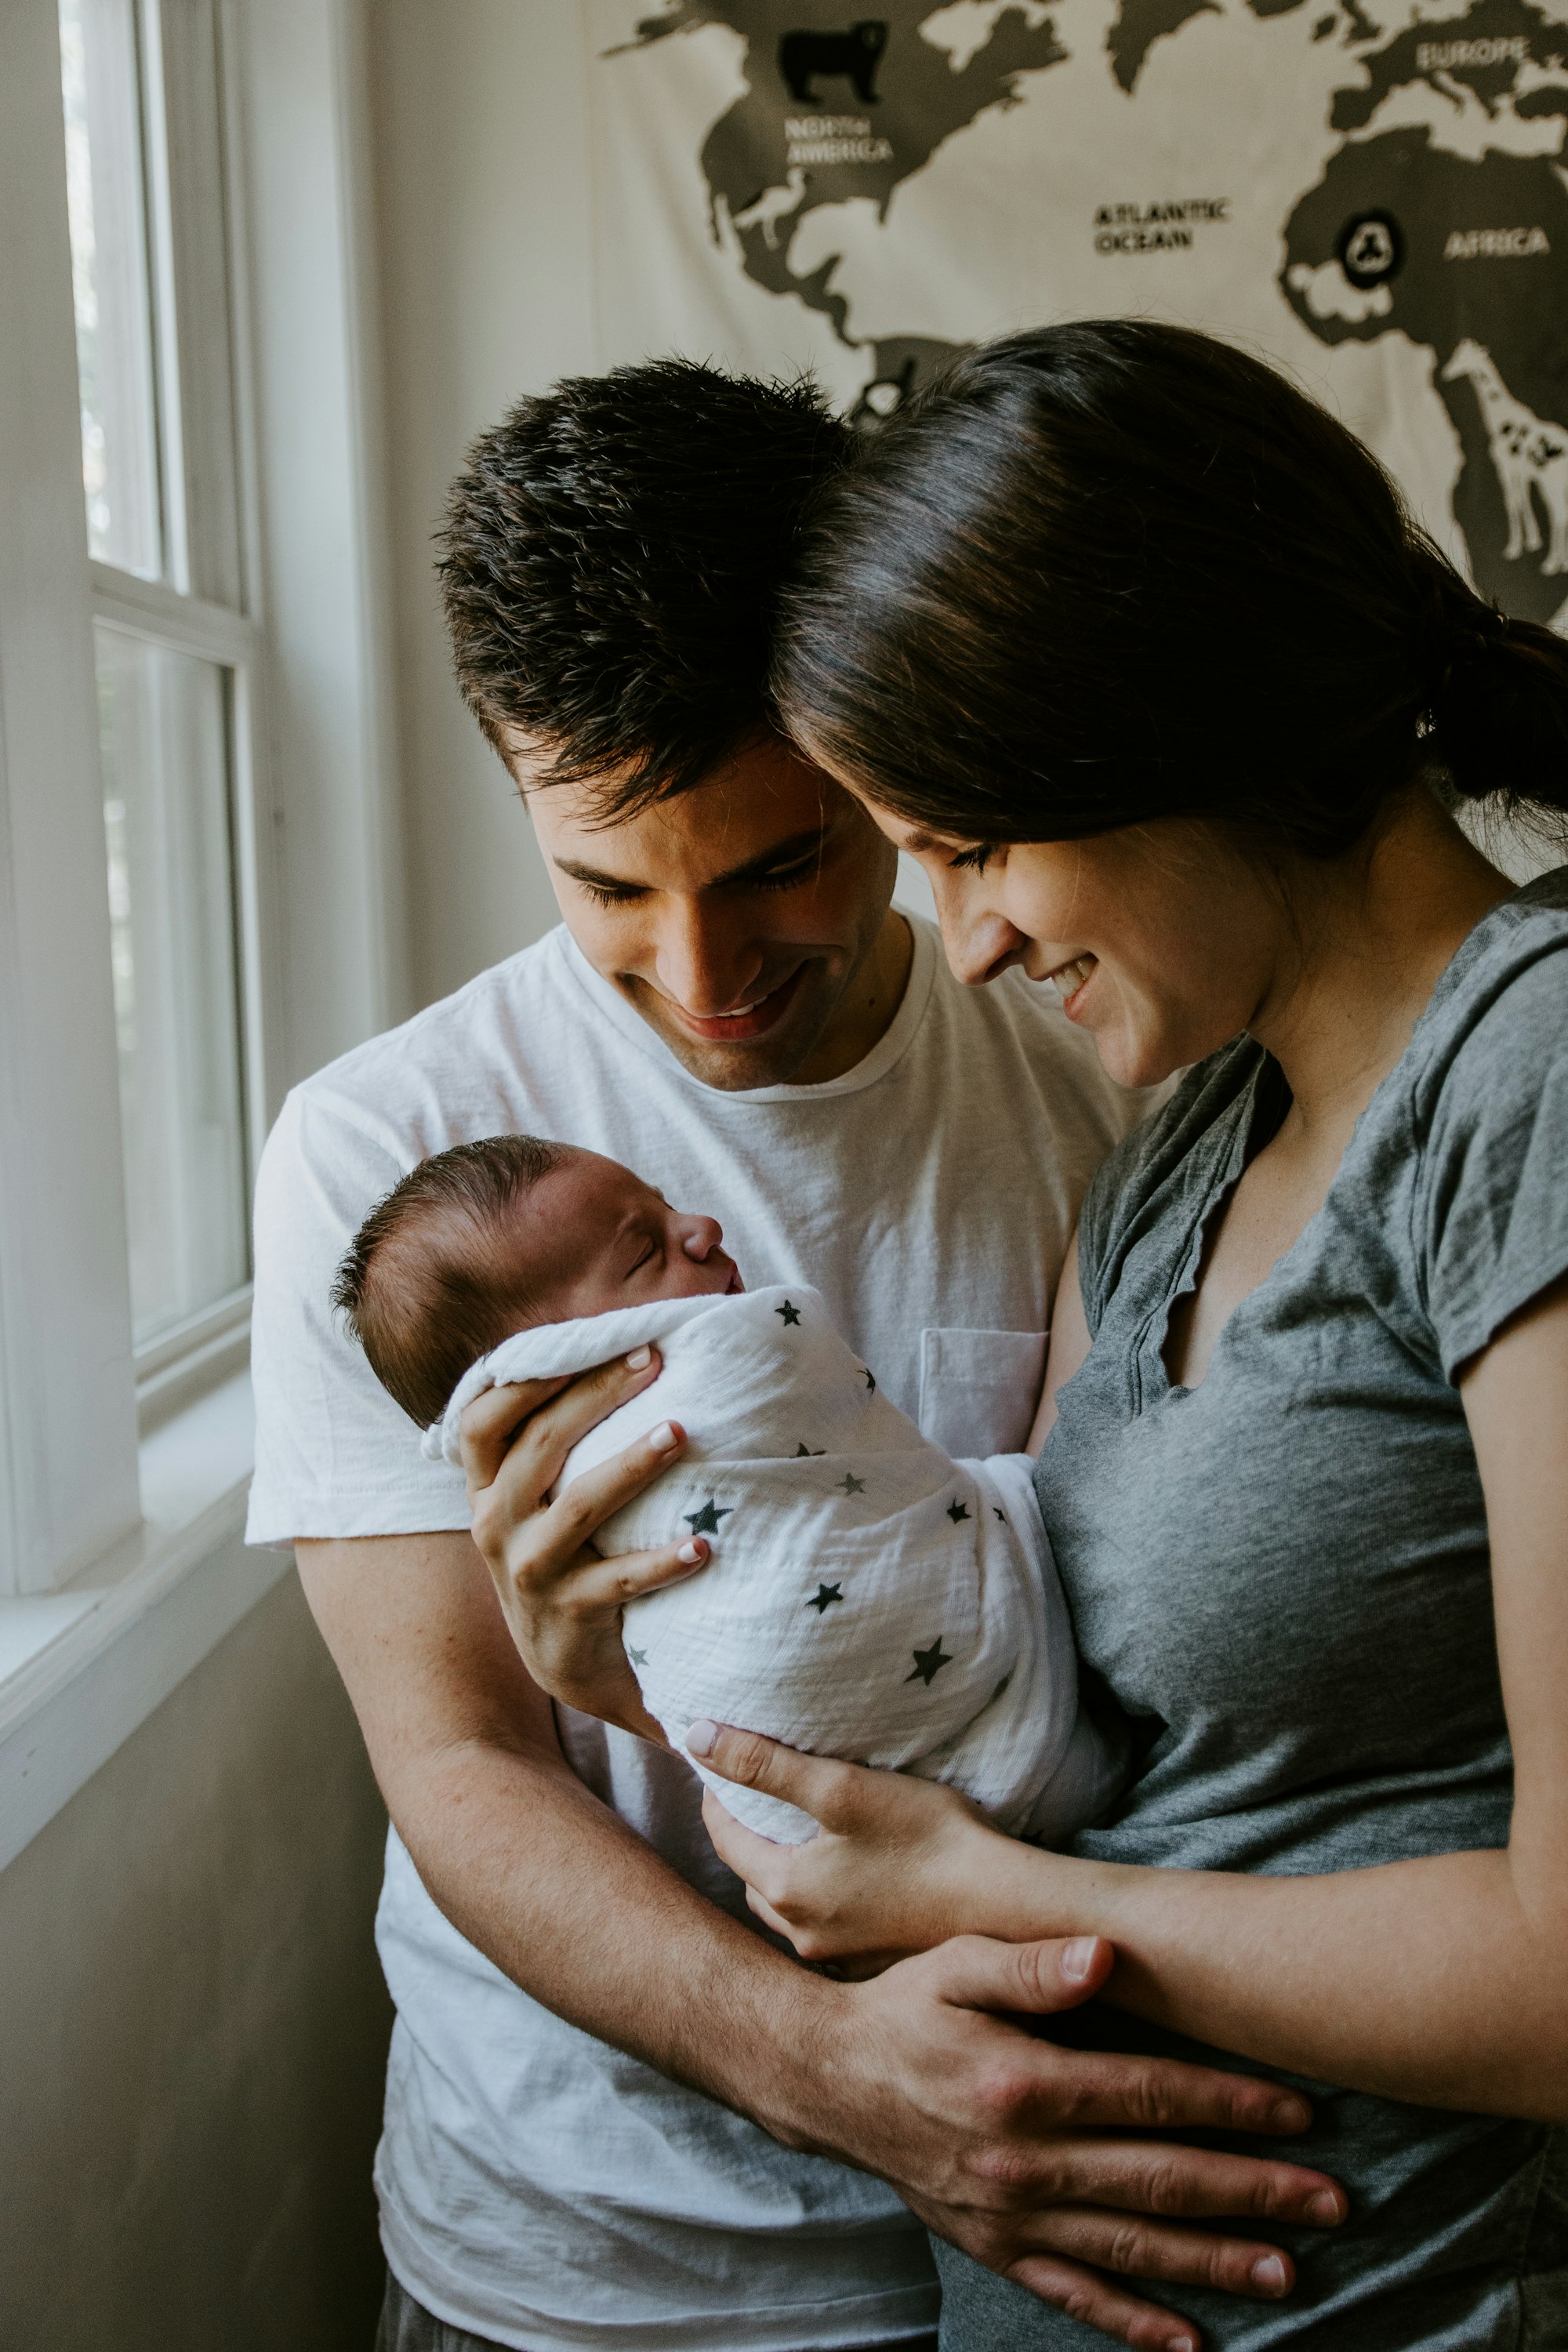 The Top Five Things I Wish New Parents Understood (But They Don't)